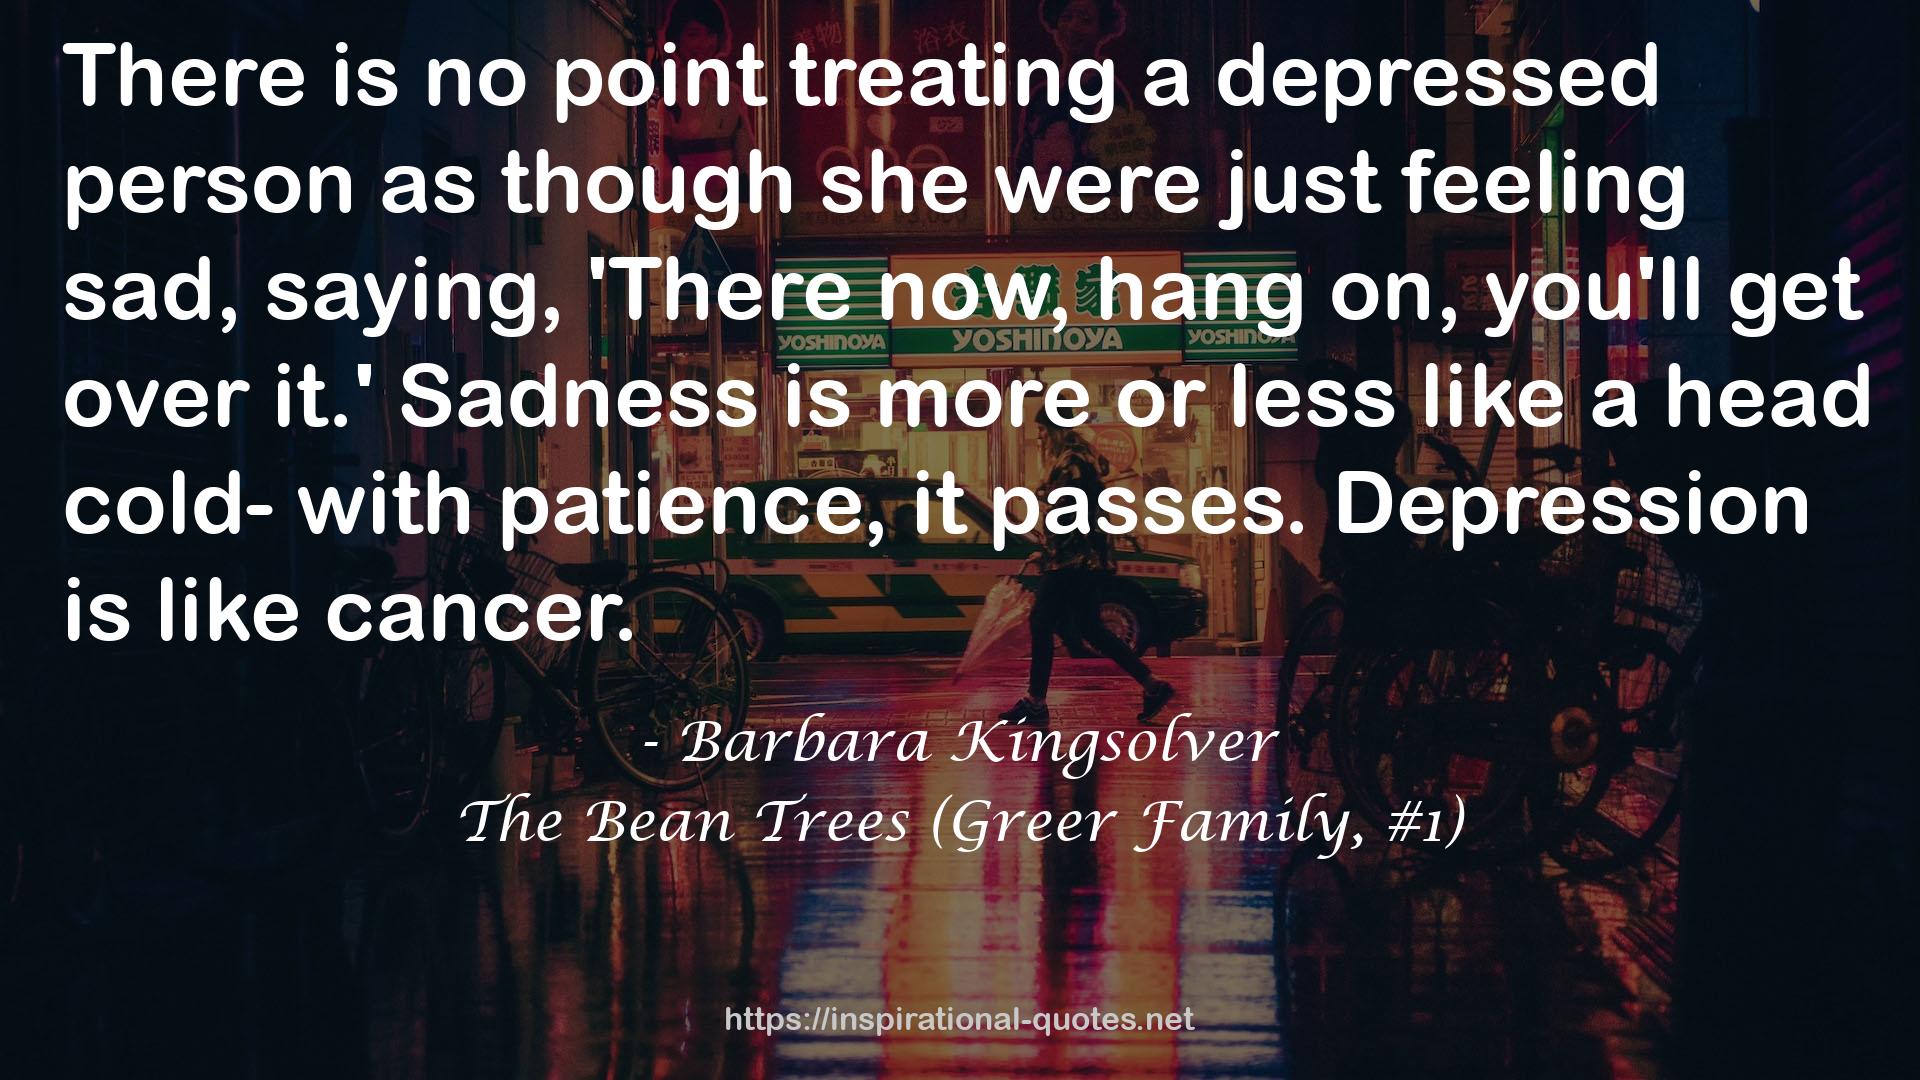 The Bean Trees (Greer Family, #1) QUOTES